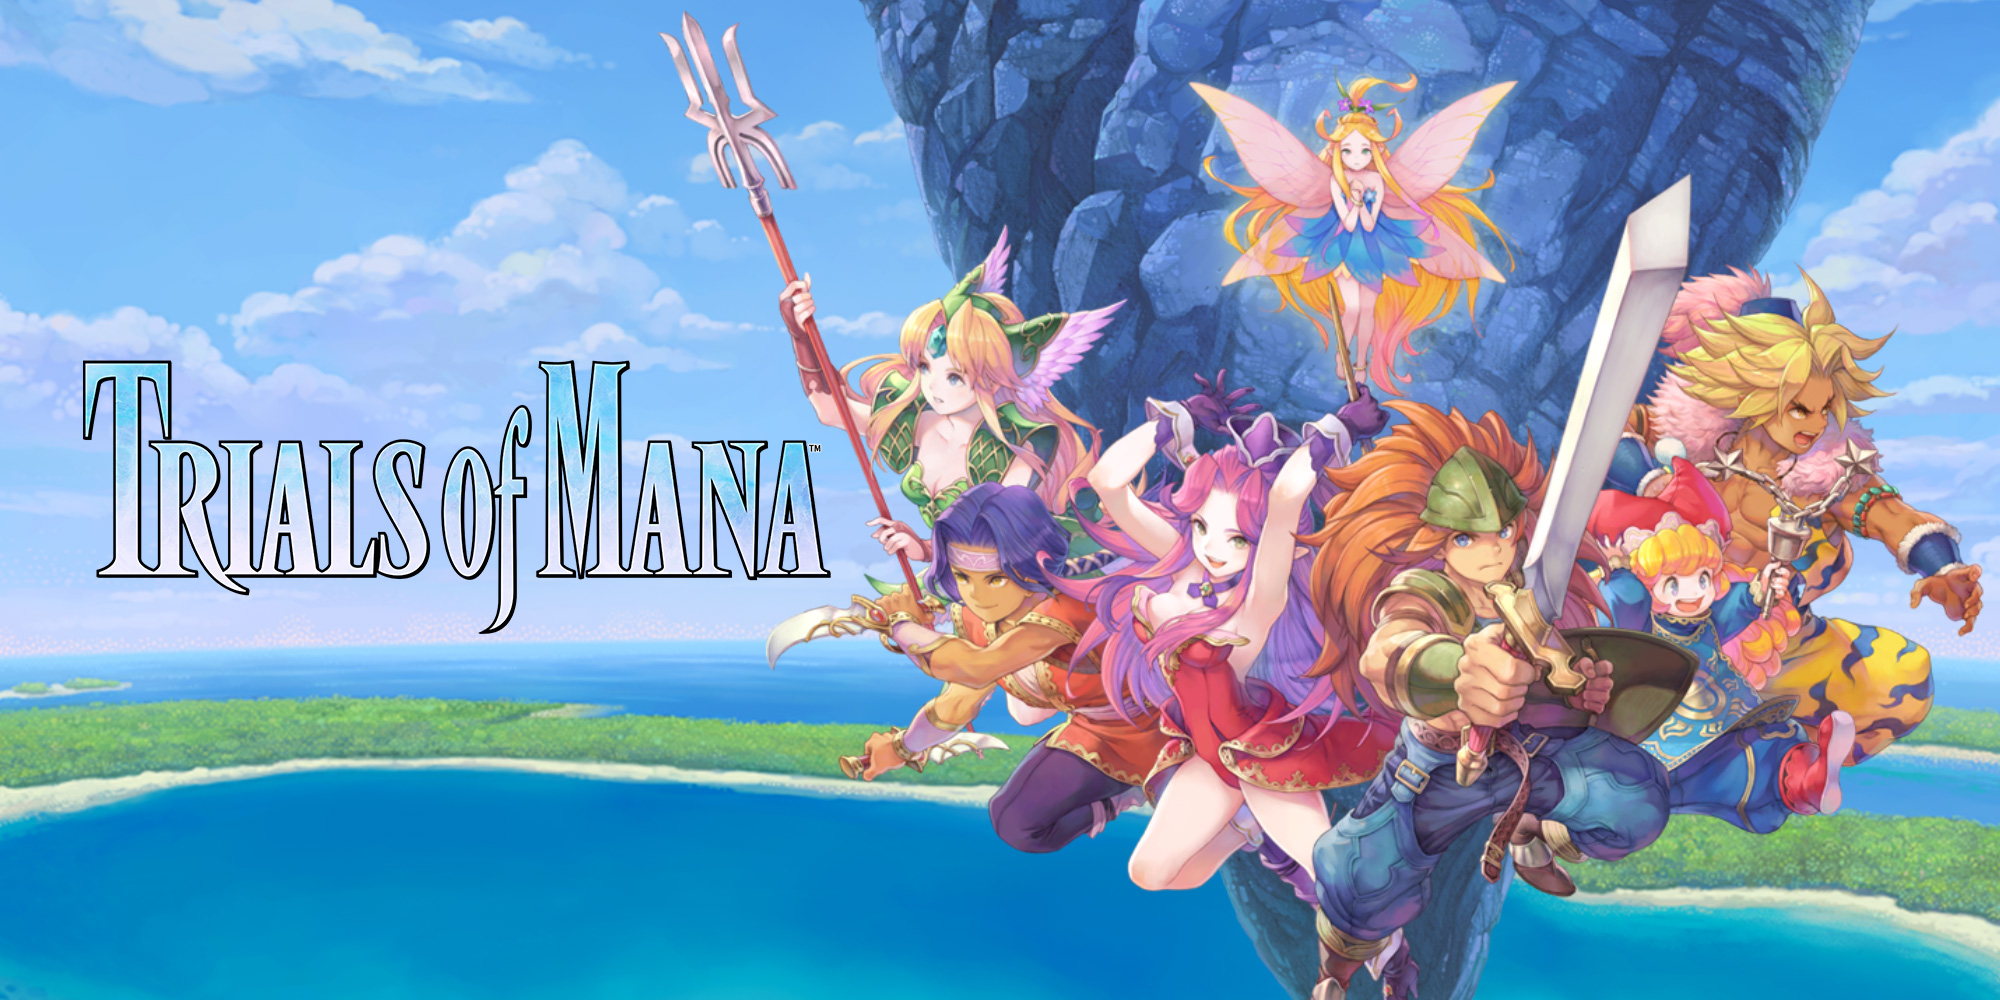 Uncover the magic of TRIALS of MANA with Nintendo Treehouse: Live, coming to Nintendo Switch in 2020